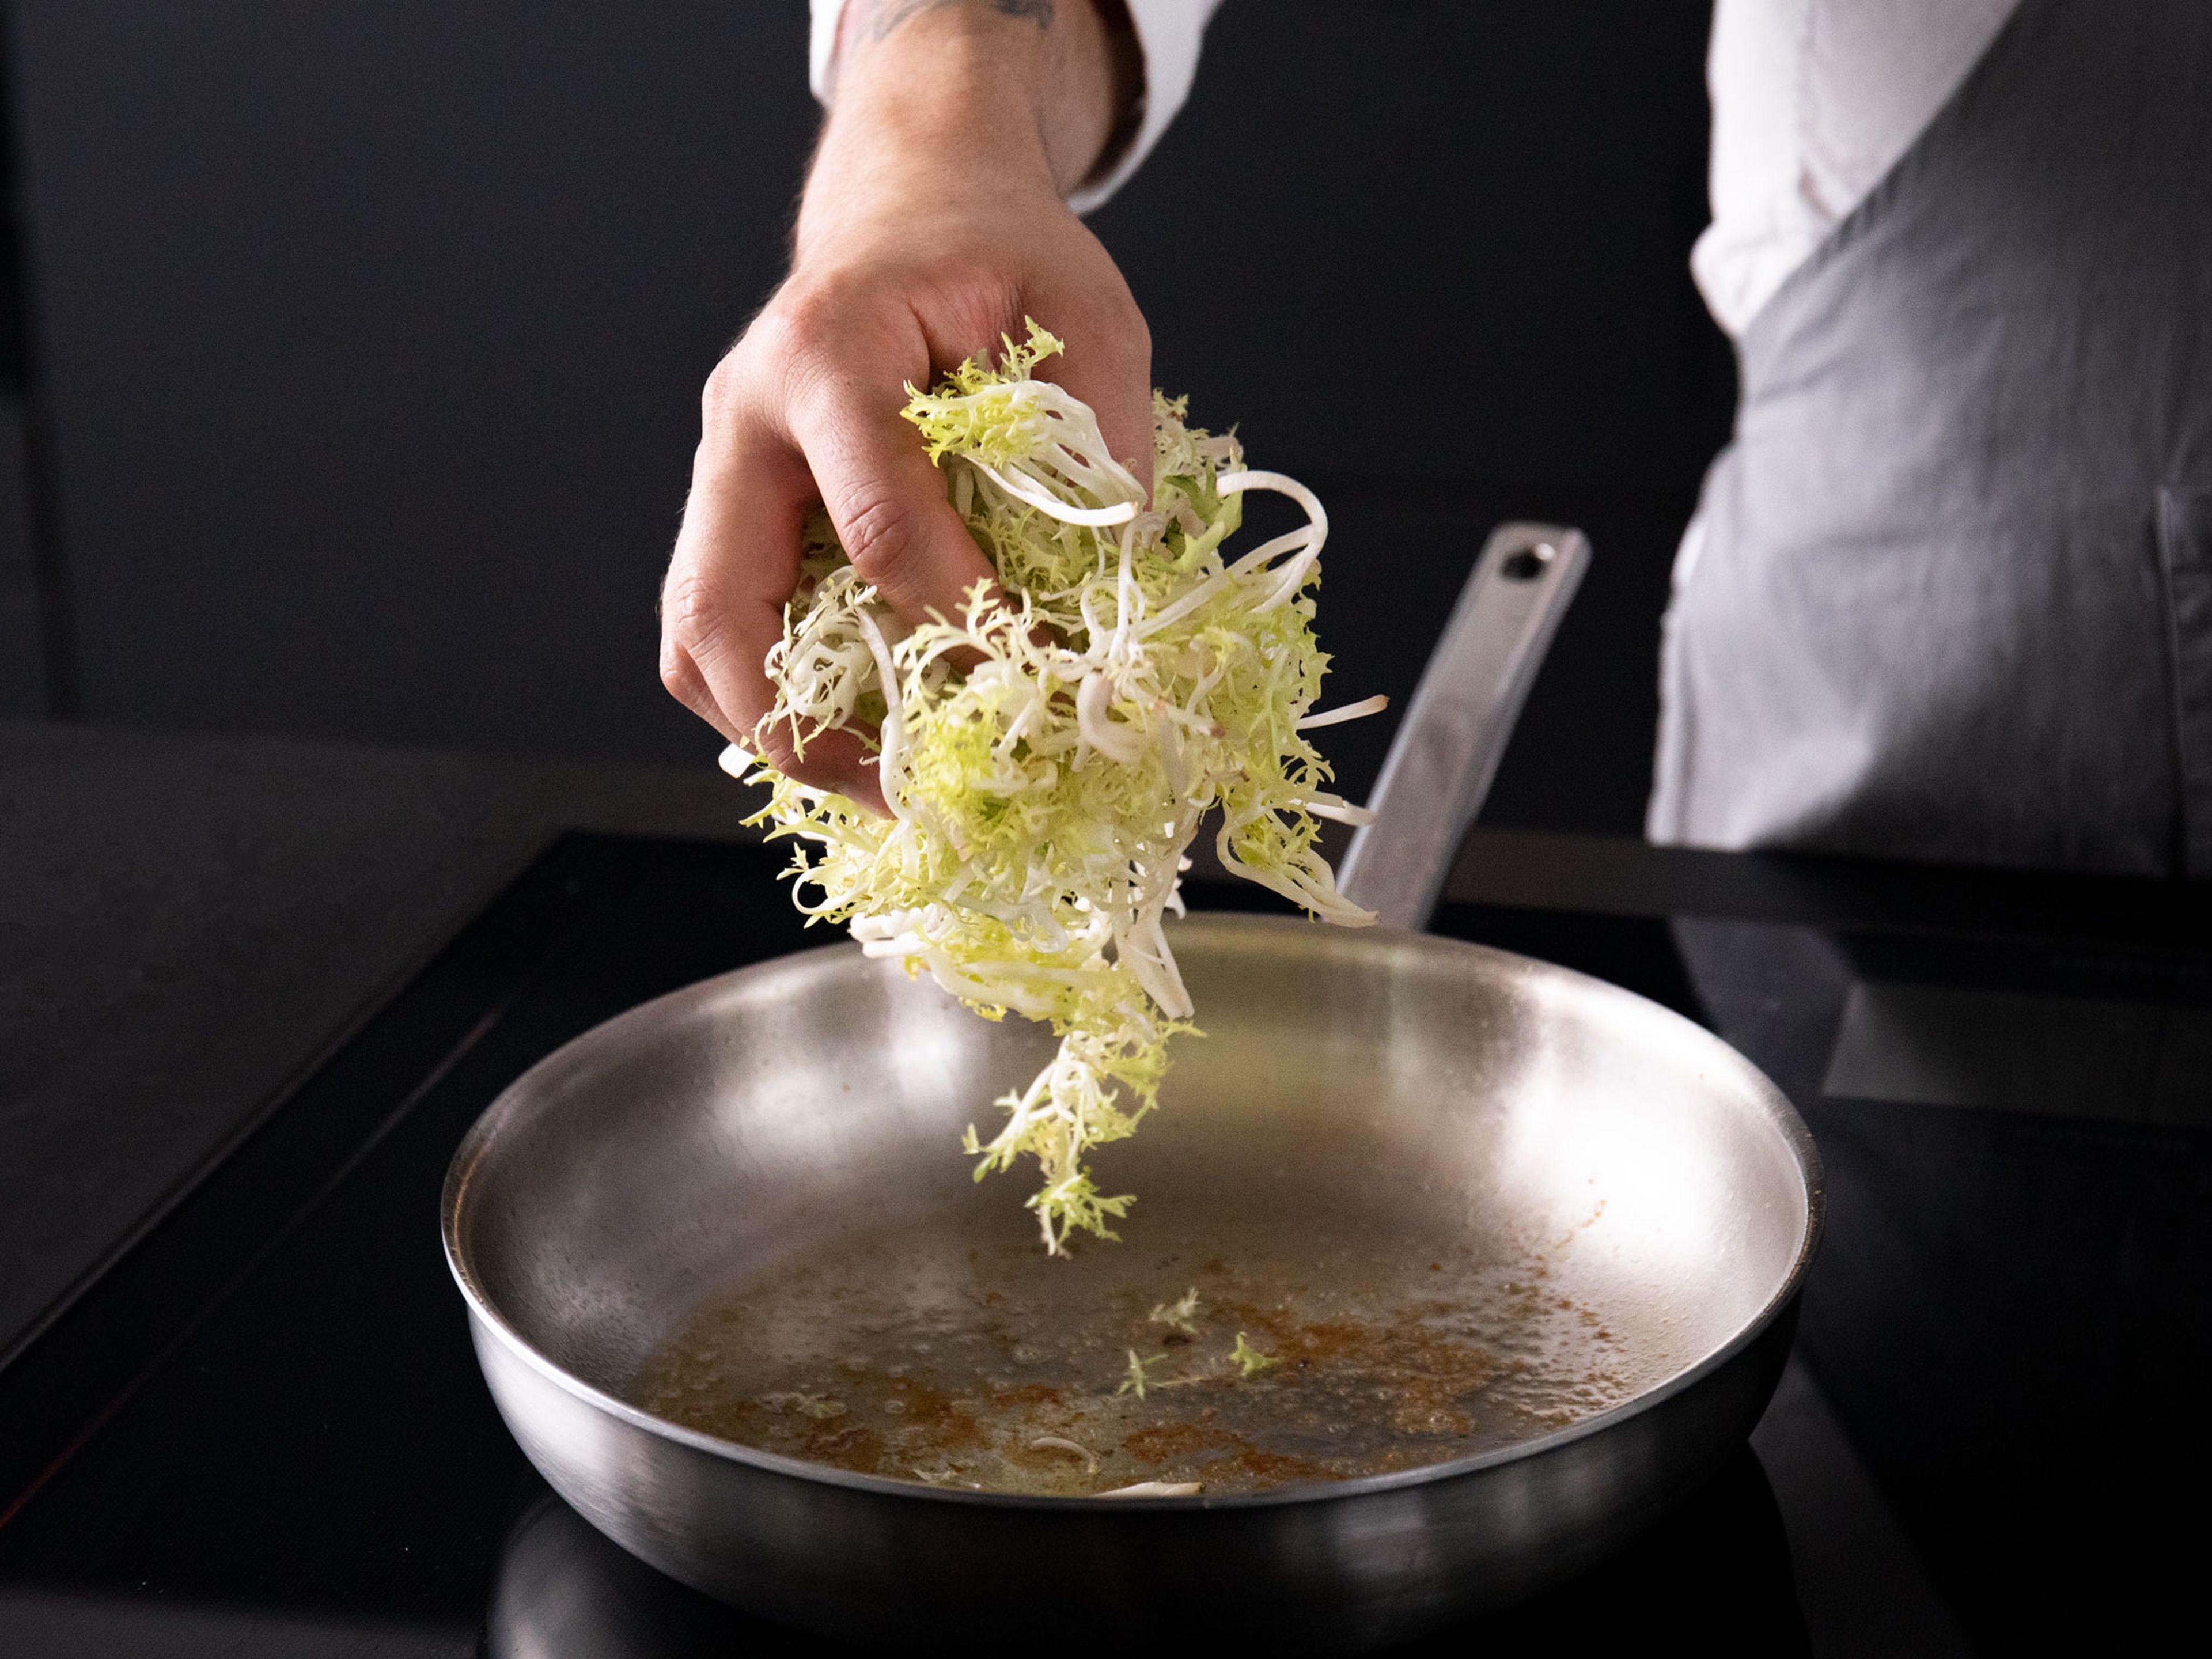 Remove chicken from pan and set aside. Add frisée to the pan over low heat with the chicken fat, toss, and let sit for approx. 5 min., or until lightly wilted.